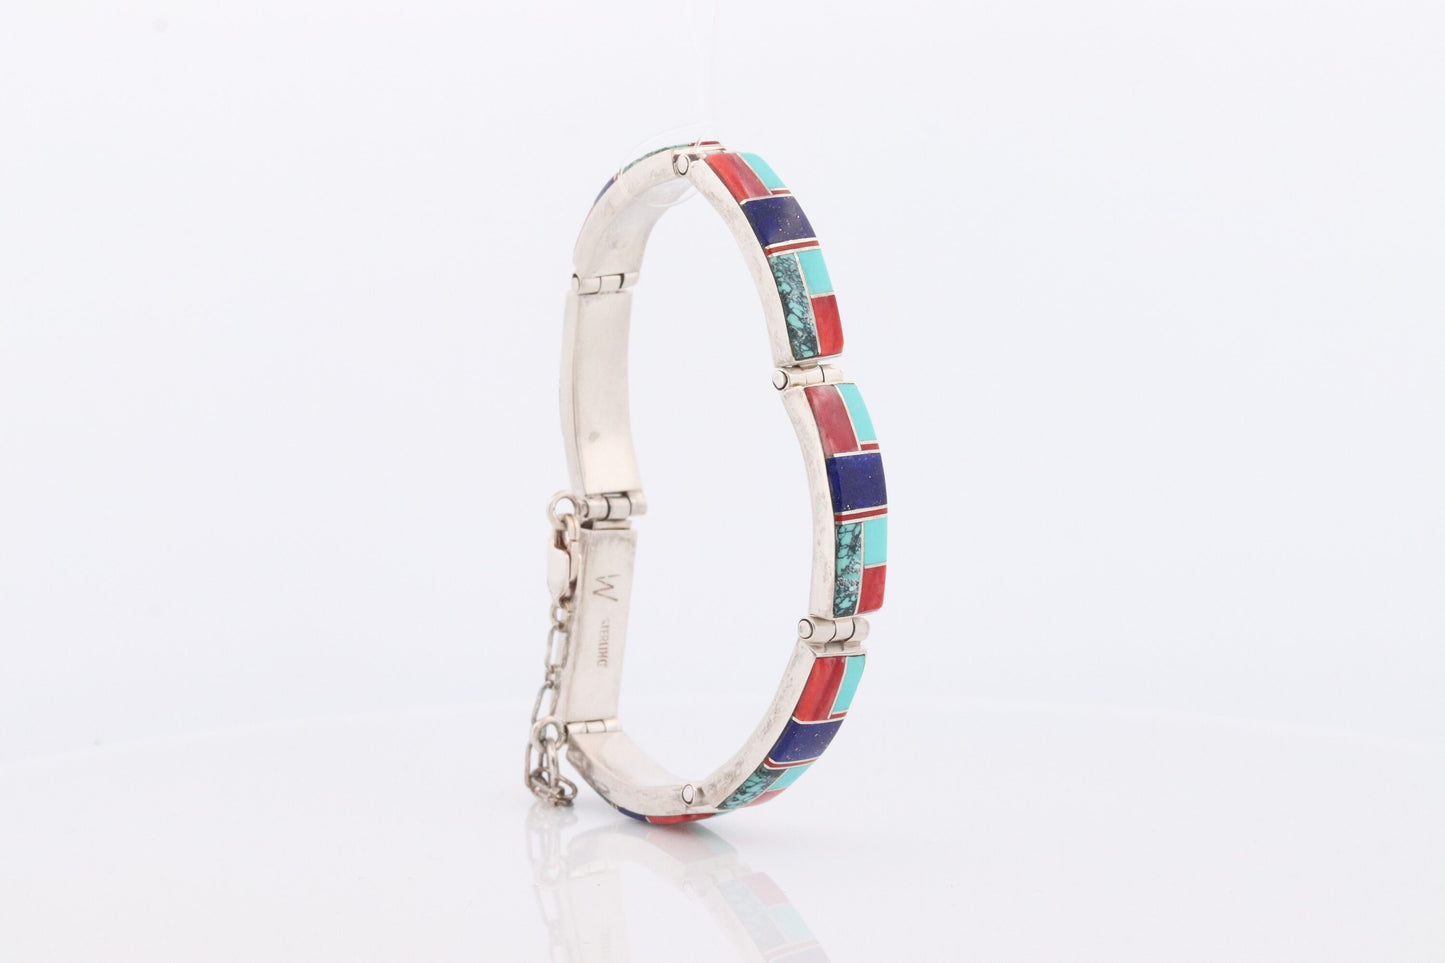 Charles Willie Navajo Sterling Silver Turquoise Bracelet. Lapis Turquoise Coral 925 Native American Zuni Turquoise cuff bangle bracelet.